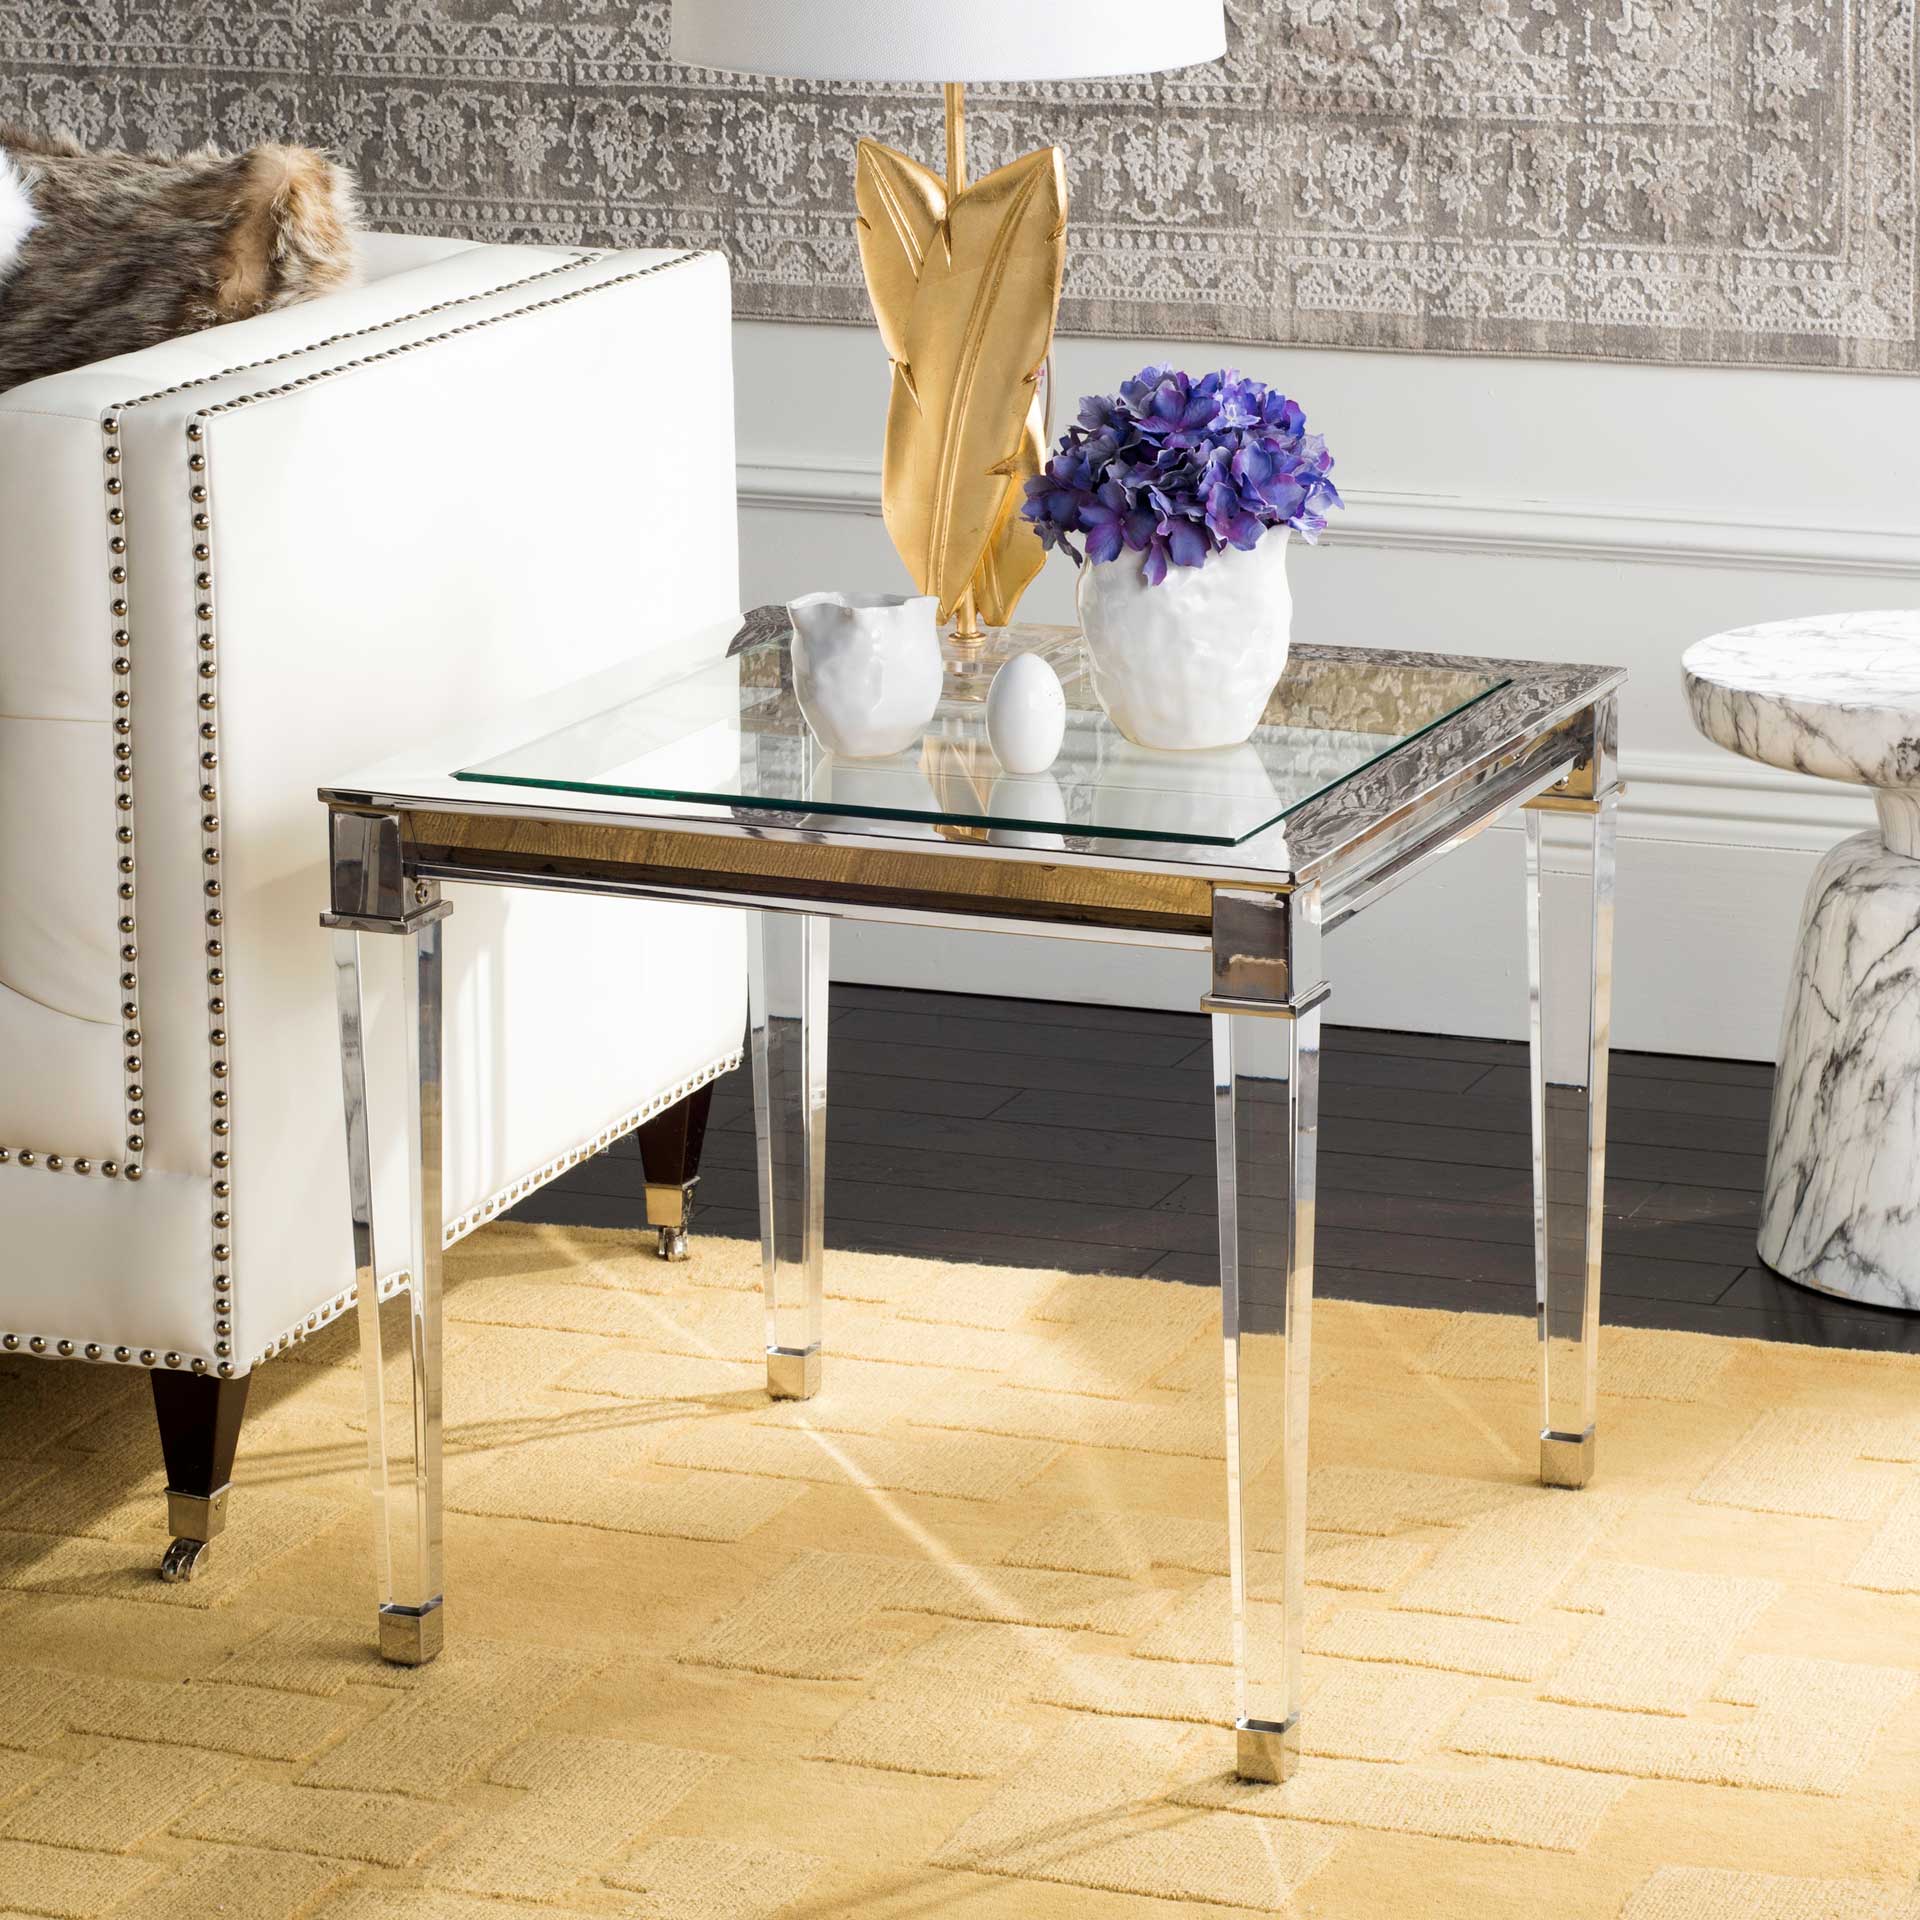 Channing Acrylic End Table